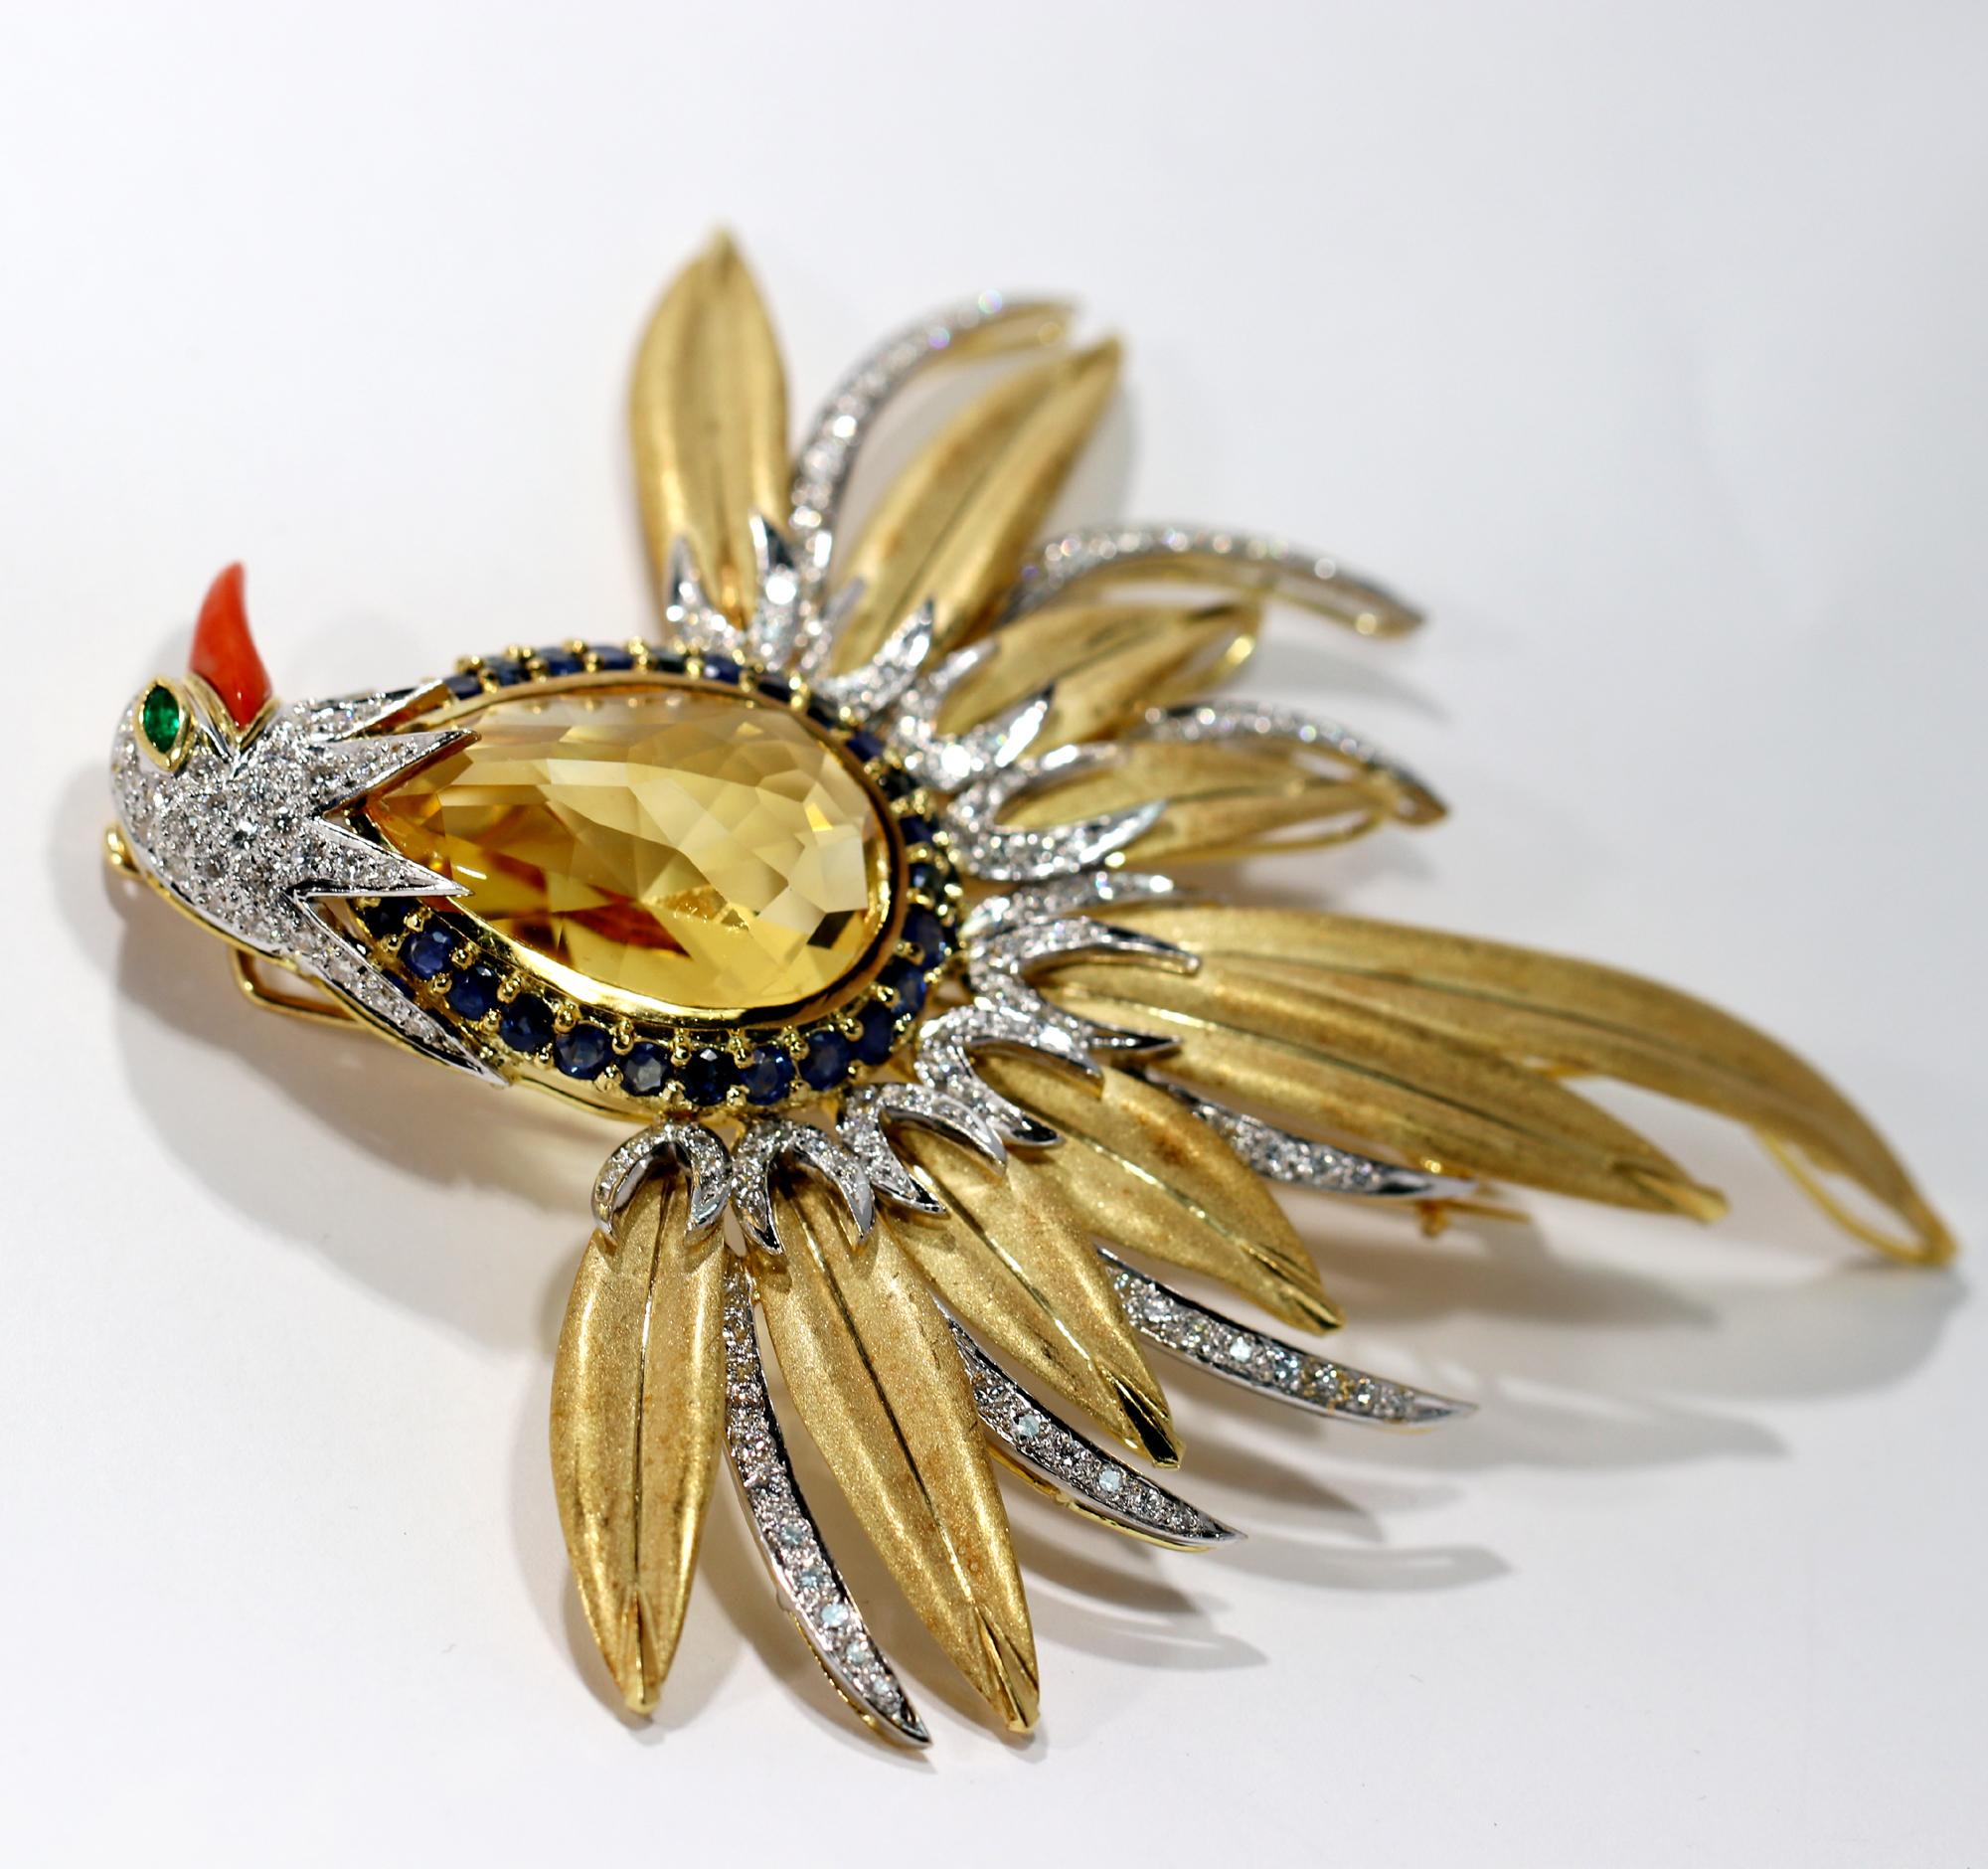 A large  brooch in 18K yellow and white gold, with broad plumage giving the look of a phoenix rising up. The white gold feathers are all pave' set with round brilliant cut diamonds for a total weight of approximately 2.25ct. The belly of this